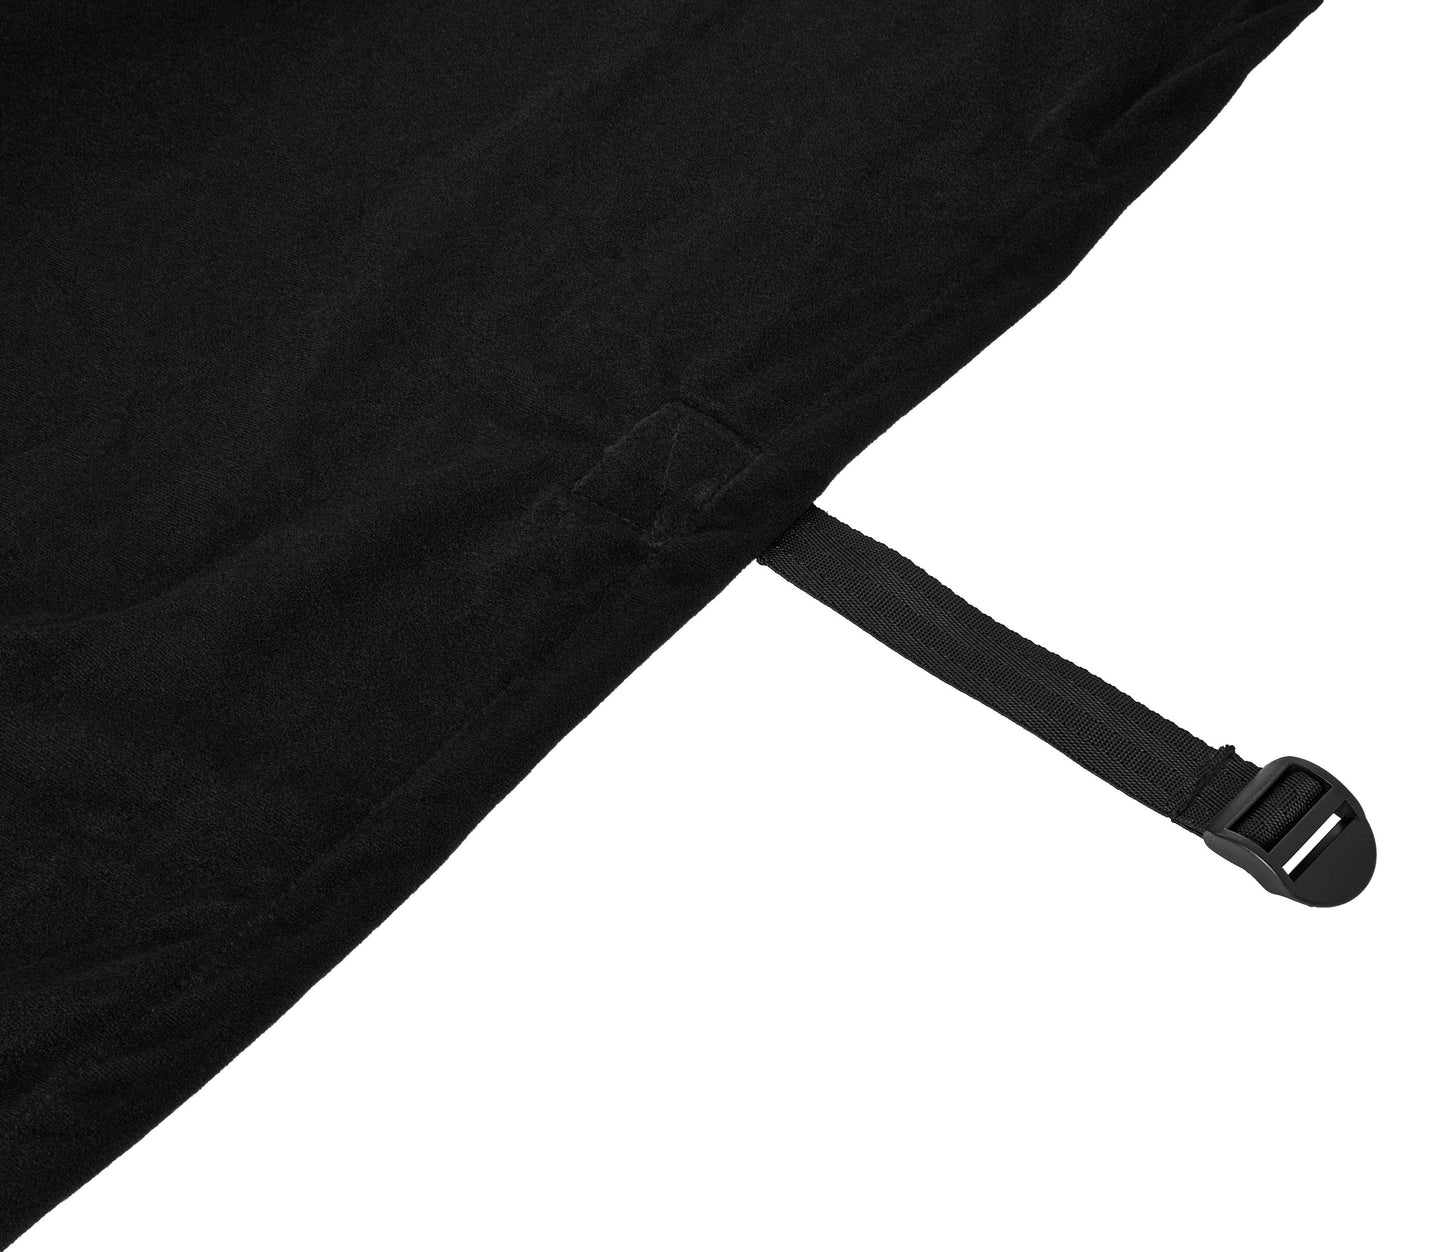 Image shows a close-up of the edge of the sheet with its adjustable straps.